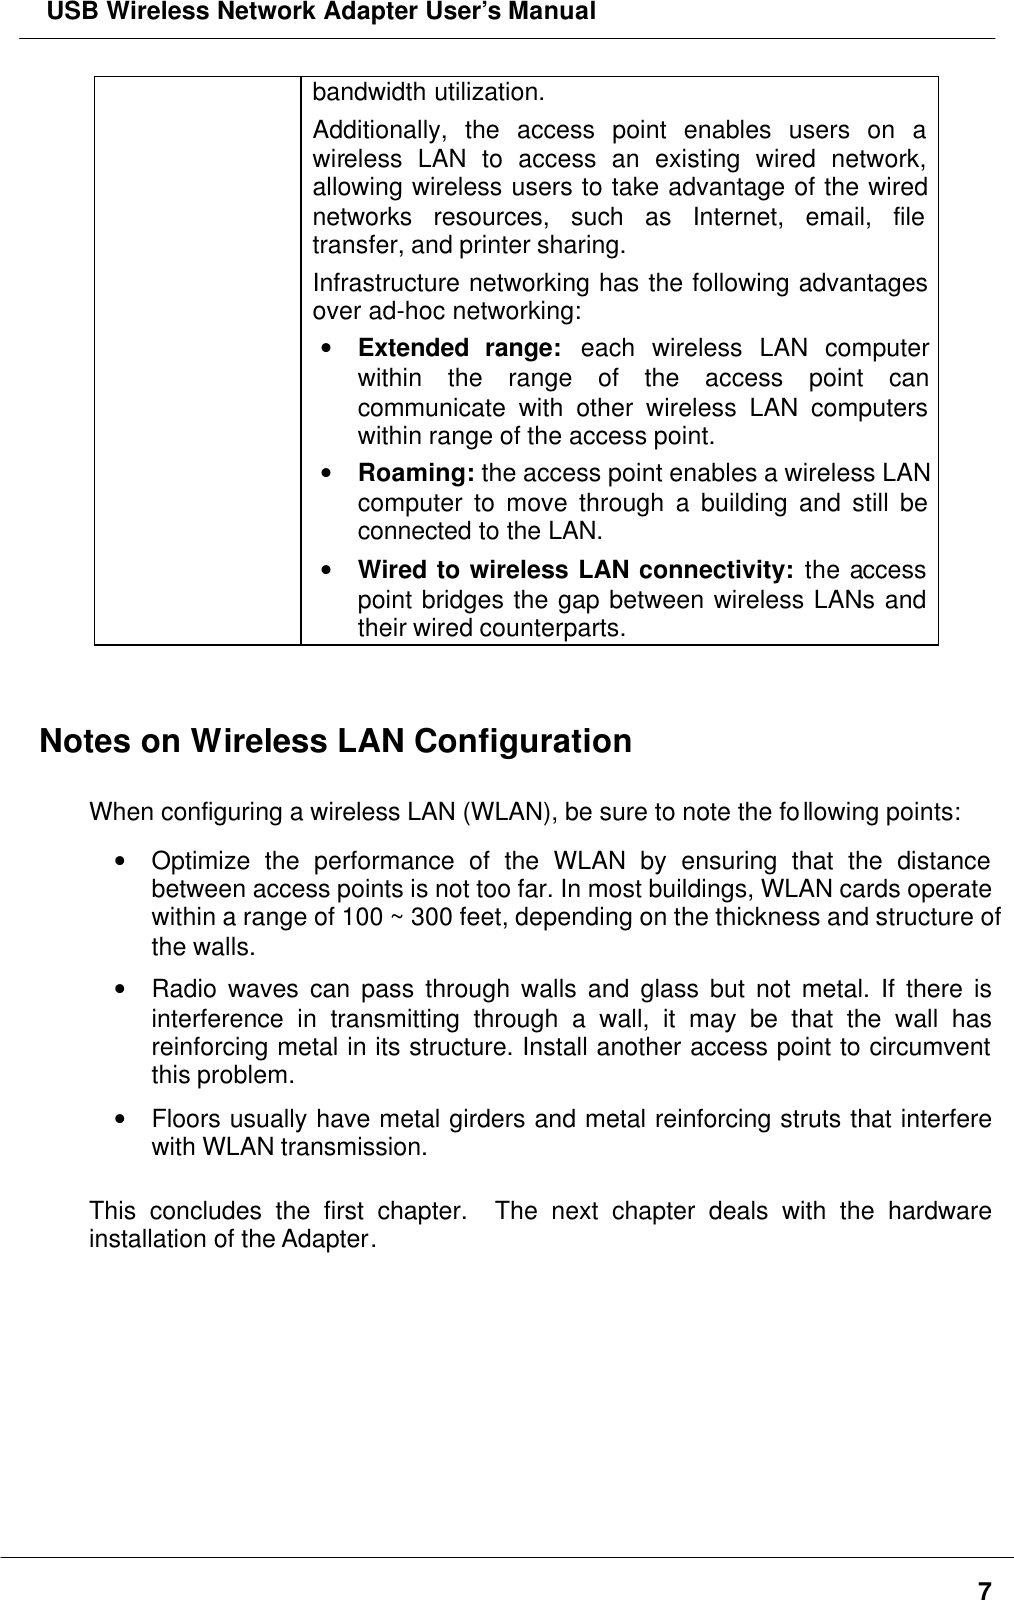  USB Wireless Network Adapter User’s Manual7bandwidth utilization.Additionally, the access point enables users on awireless LAN to access an existing wired network,allowing wireless users to take advantage of the wirednetworks resources, such as Internet, email, filetransfer, and printer sharing.Infrastructure networking has the following advantagesover ad-hoc networking:• Extended range: each wireless LAN computerwithin the range of the access point cancommunicate with other wireless LAN computerswithin range of the access point.• Roaming: the access point enables a wireless LANcomputer to move through a building and still beconnected to the LAN.• Wired to wireless LAN connectivity: the accesspoint bridges the gap between wireless LANs andtheir wired counterparts.Notes on Wireless LAN ConfigurationWhen configuring a wireless LAN (WLAN), be sure to note the following points:• Optimize the performance of the WLAN by ensuring that the distancebetween access points is not too far. In most buildings, WLAN cards operatewithin a range of 100 ~ 300 feet, depending on the thickness and structure ofthe walls.• Radio waves can pass through walls and glass but not metal. If there isinterference in transmitting through a wall, it may be that the wall hasreinforcing metal in its structure. Install another access point to circumventthis problem.• Floors usually have metal girders and metal reinforcing struts that interferewith WLAN transmission.This concludes the first chapter.  The next chapter deals with the hardwareinstallation of the Adapter.